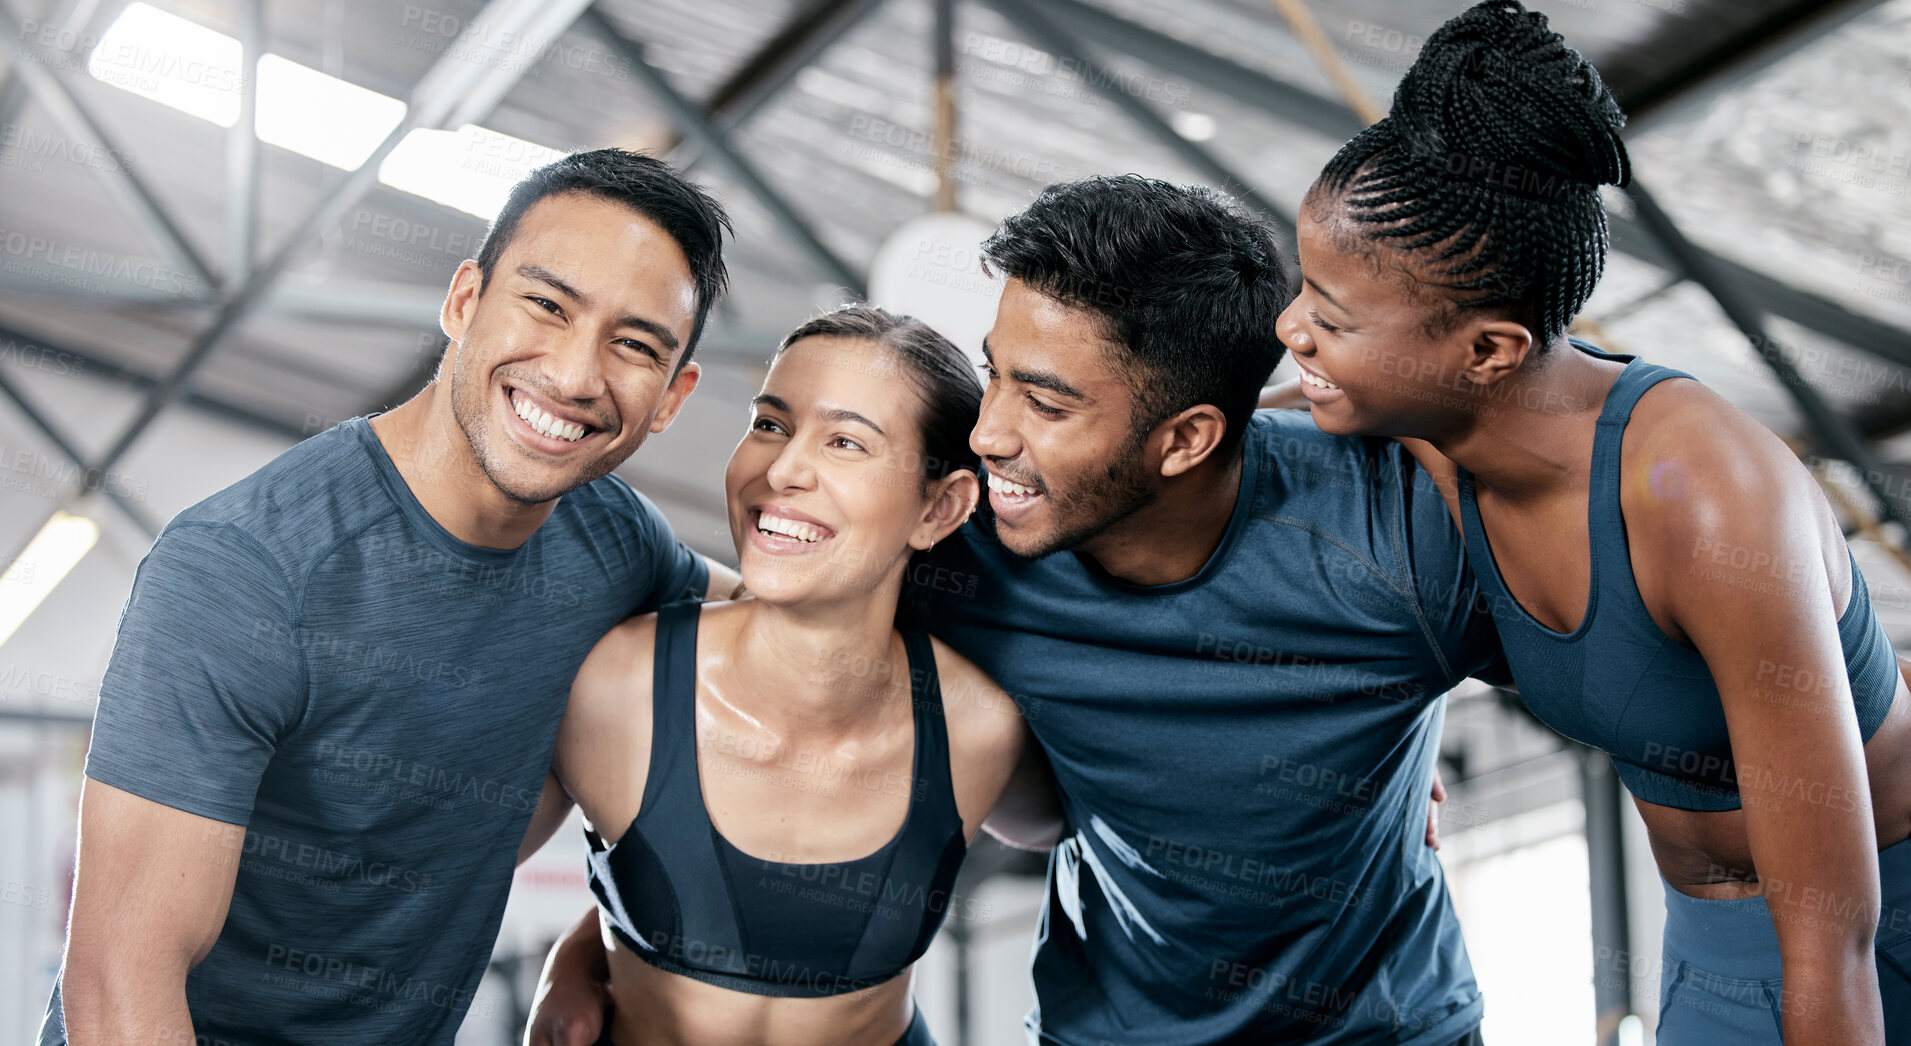 Buy stock photo Diversity, fitness and team collaboration for exercise, workout or training together at a indoor gym. Happy diverse group of people with smile in sports teamwork, huddle or hug for healthy exercising